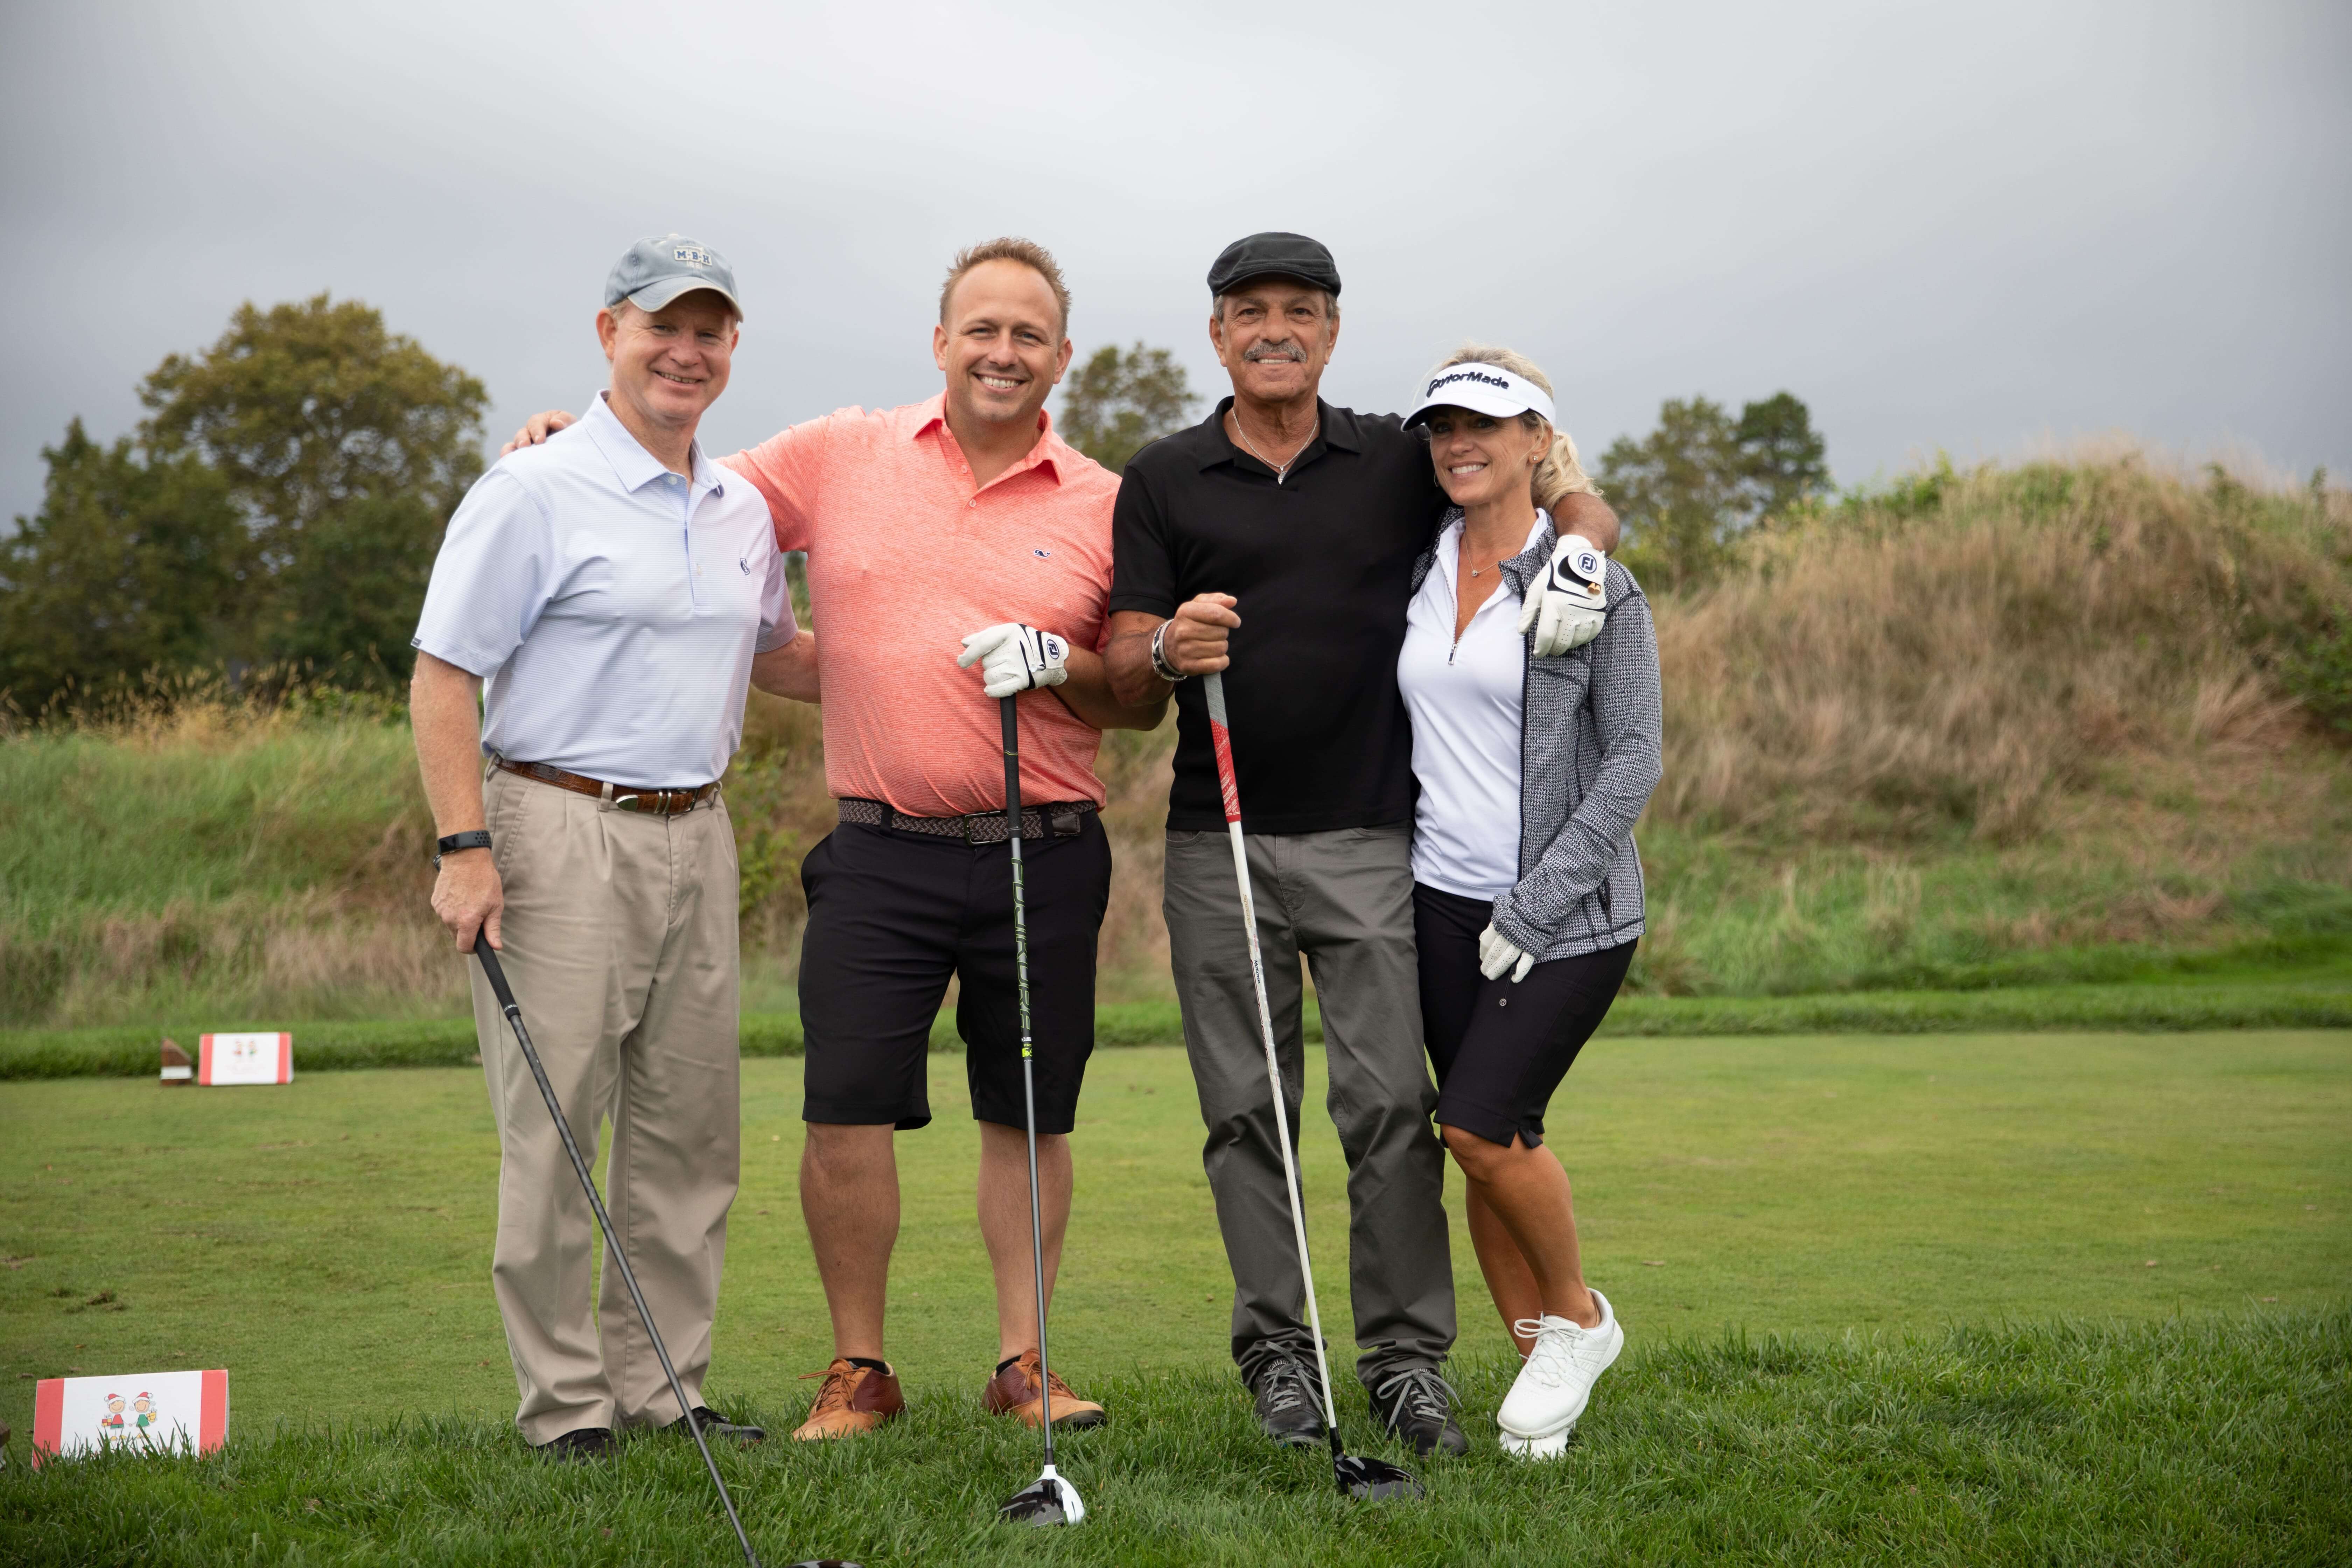 16th Annual Golf Outing & Dinner